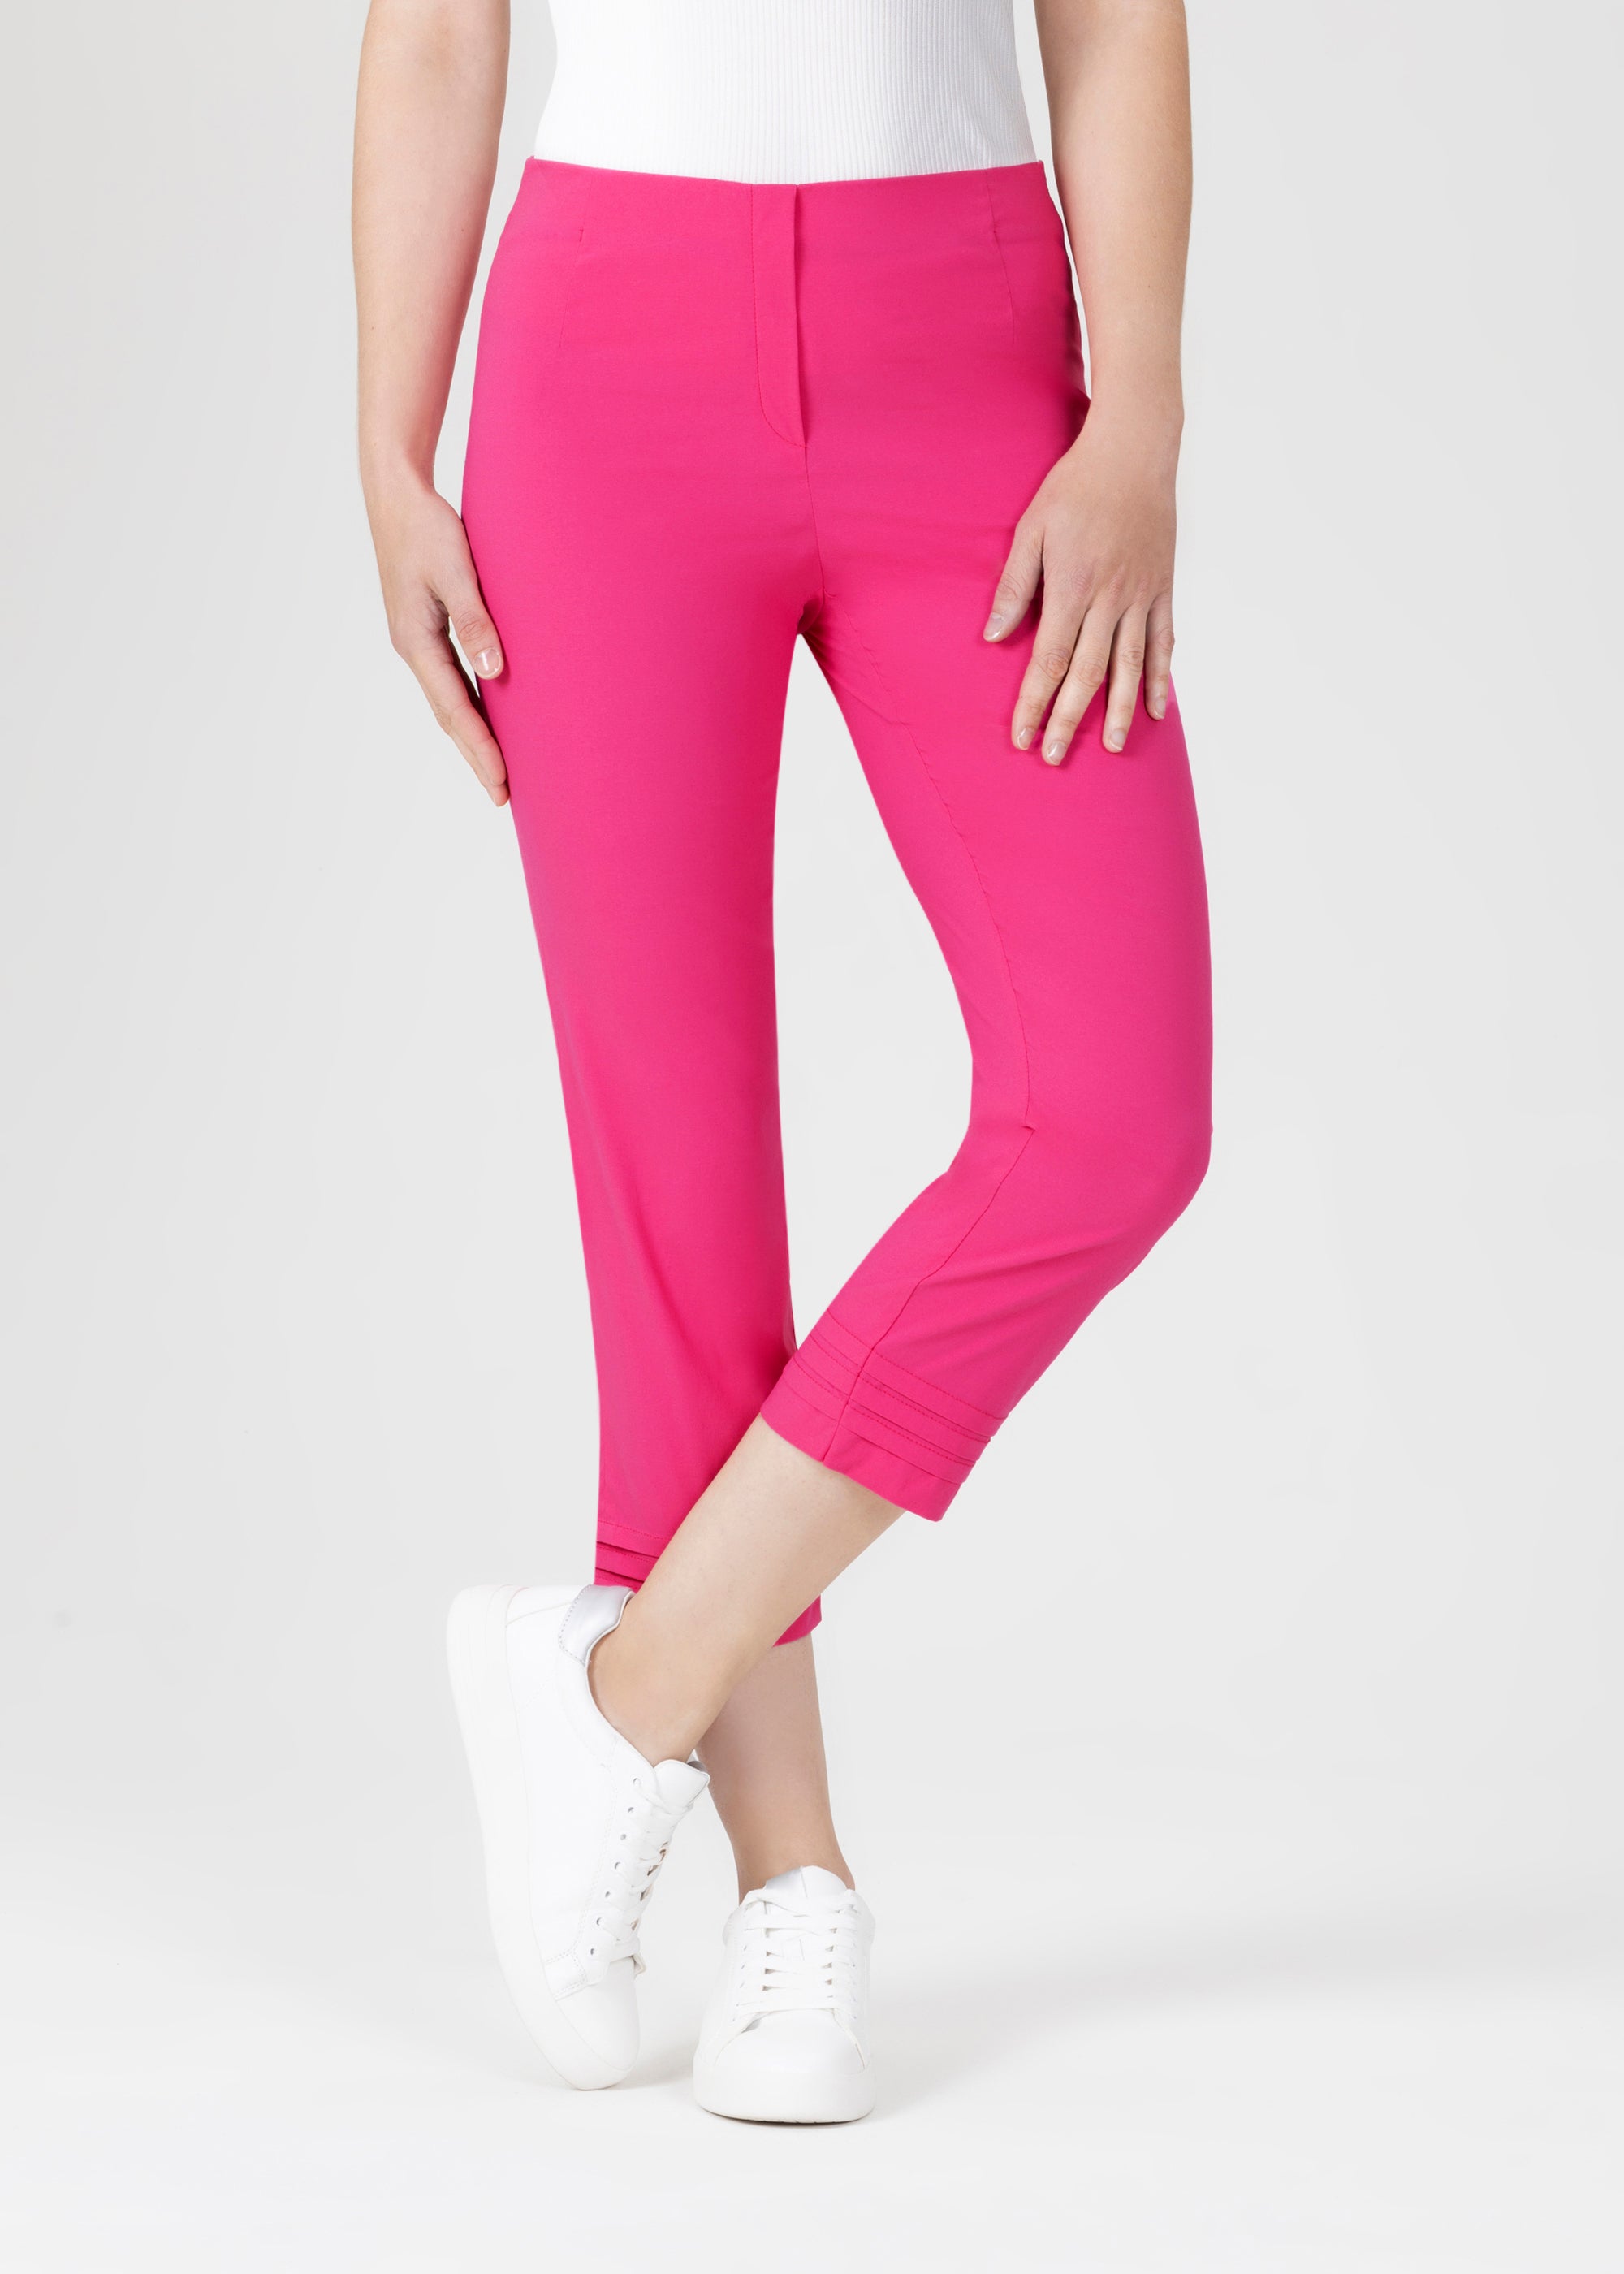 Ina 6/8-Hose pink OFFICIAL SHOP Bengaline in | Stehmann-store.com Sommer in – ONLINE